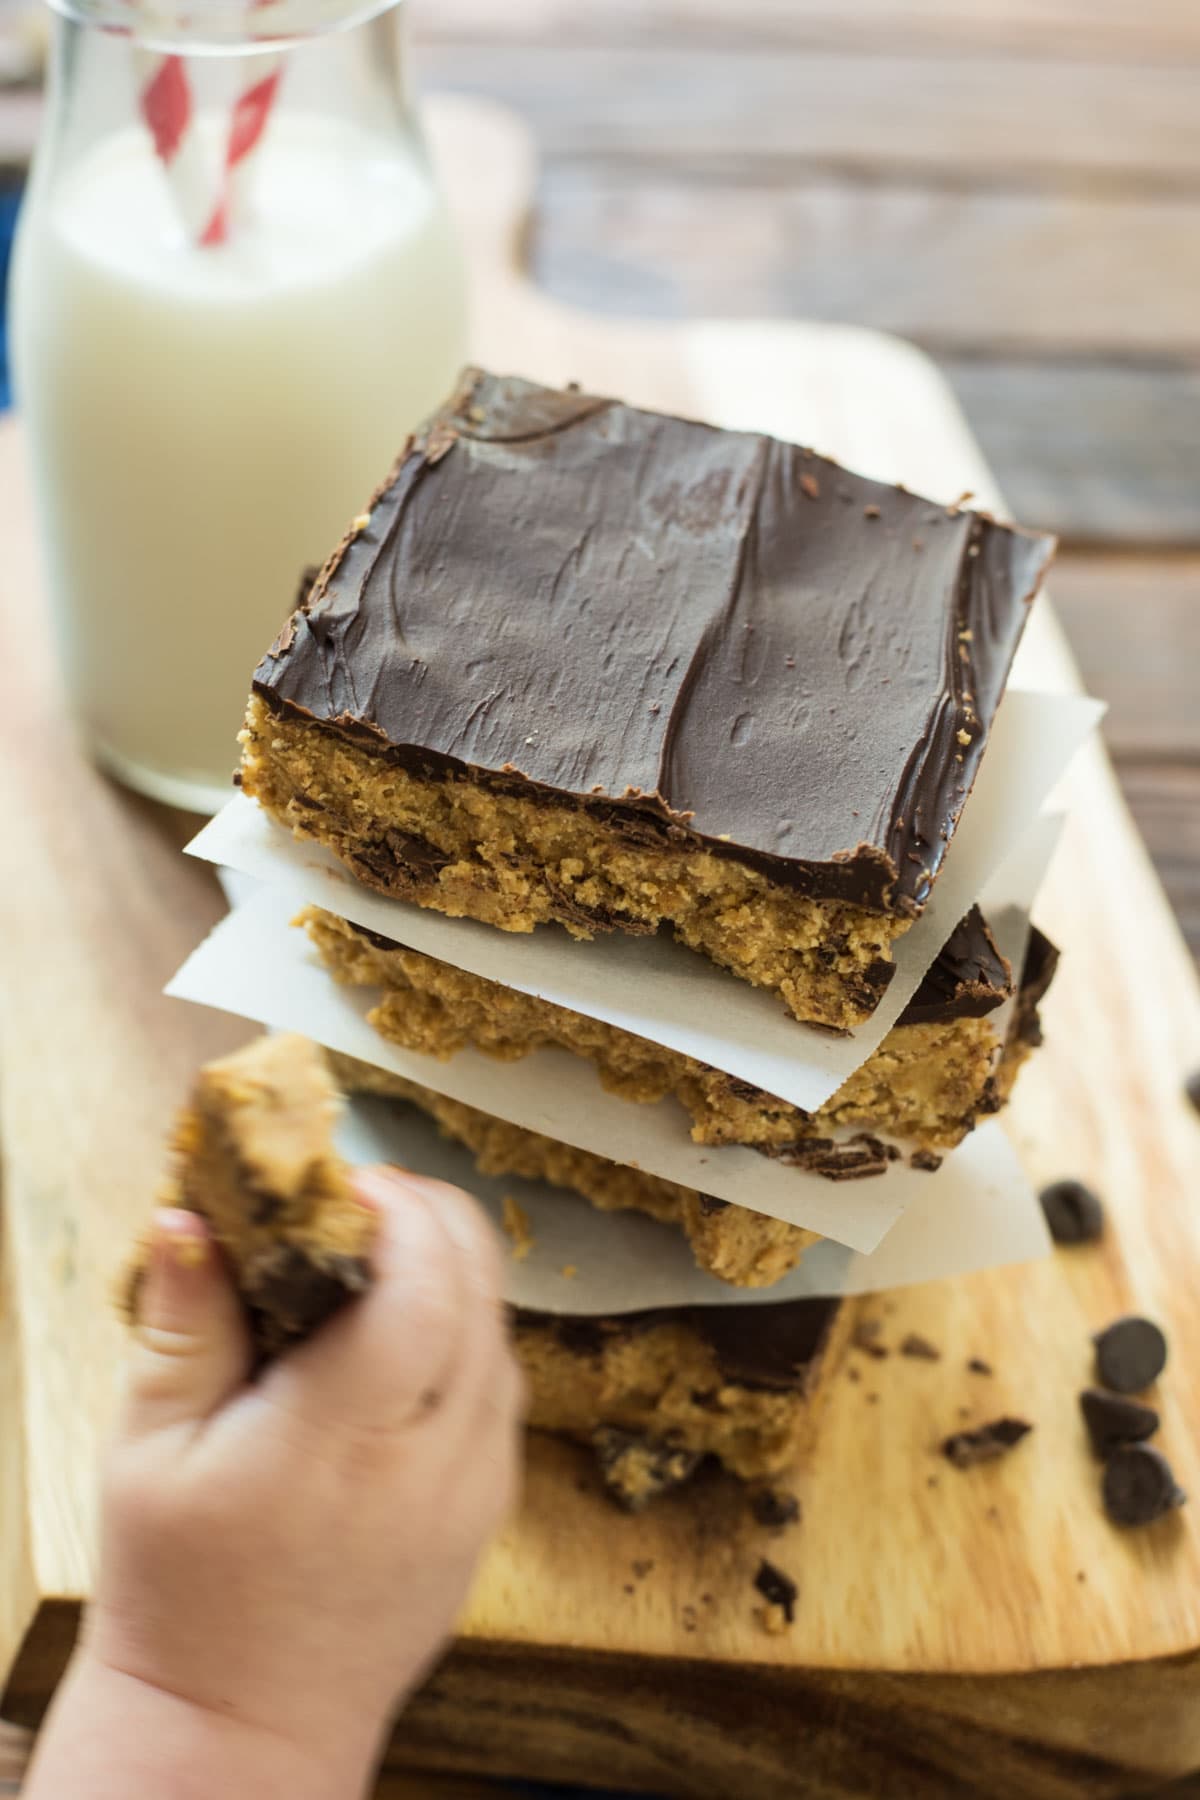 a hand takes a piece of a no bake peanut butter bar dessert from a stack